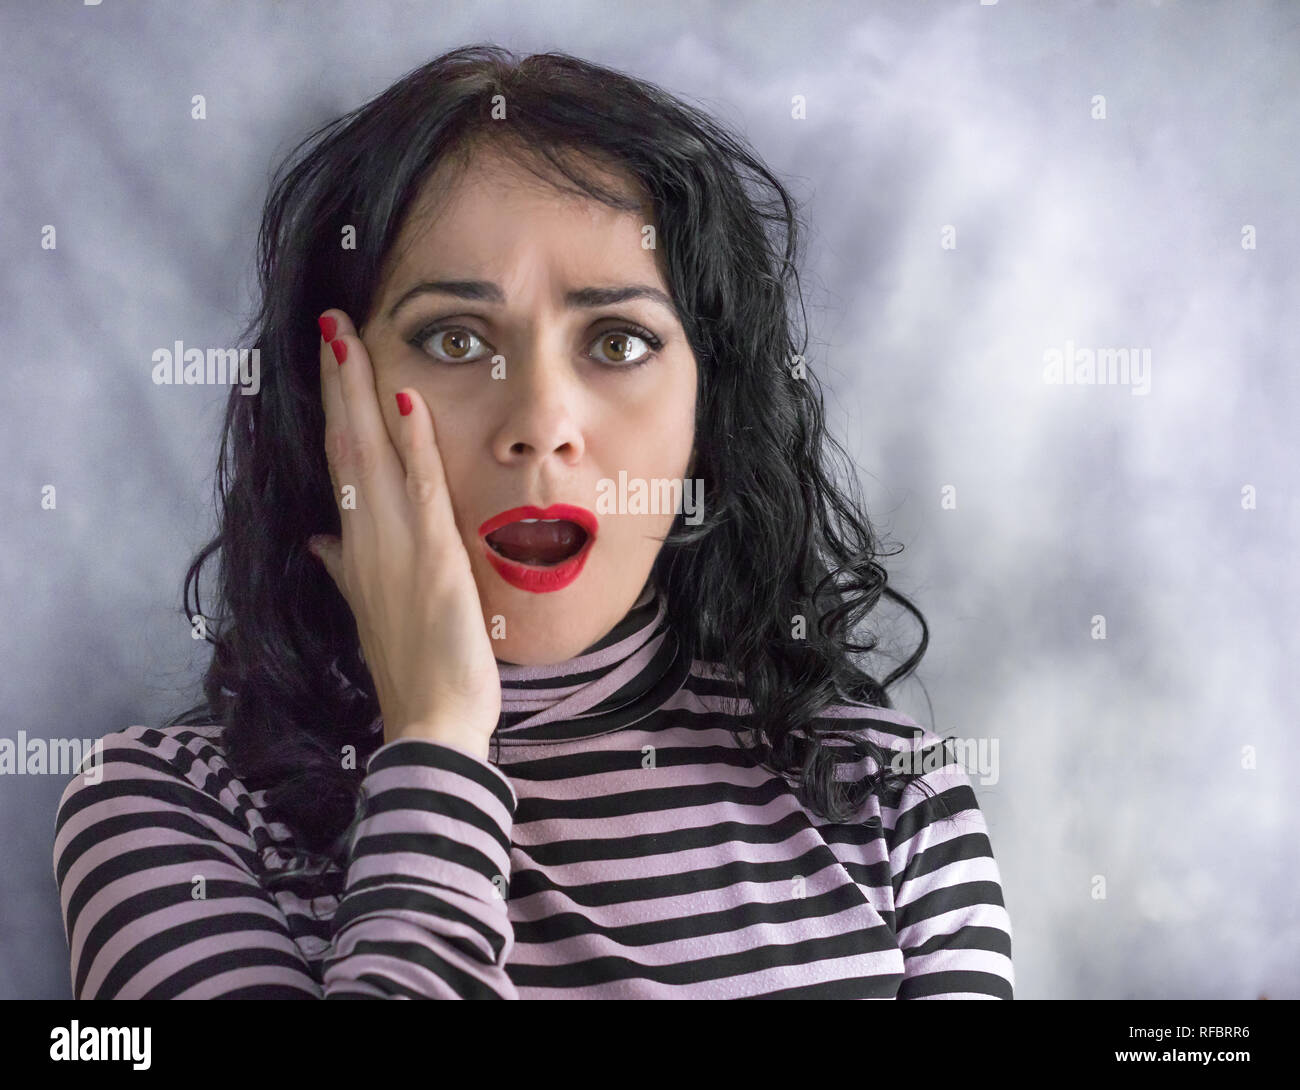 Adult hispanic woman over isolated background afraid and shocked with surprise expression, fear and excited face Stock Photo